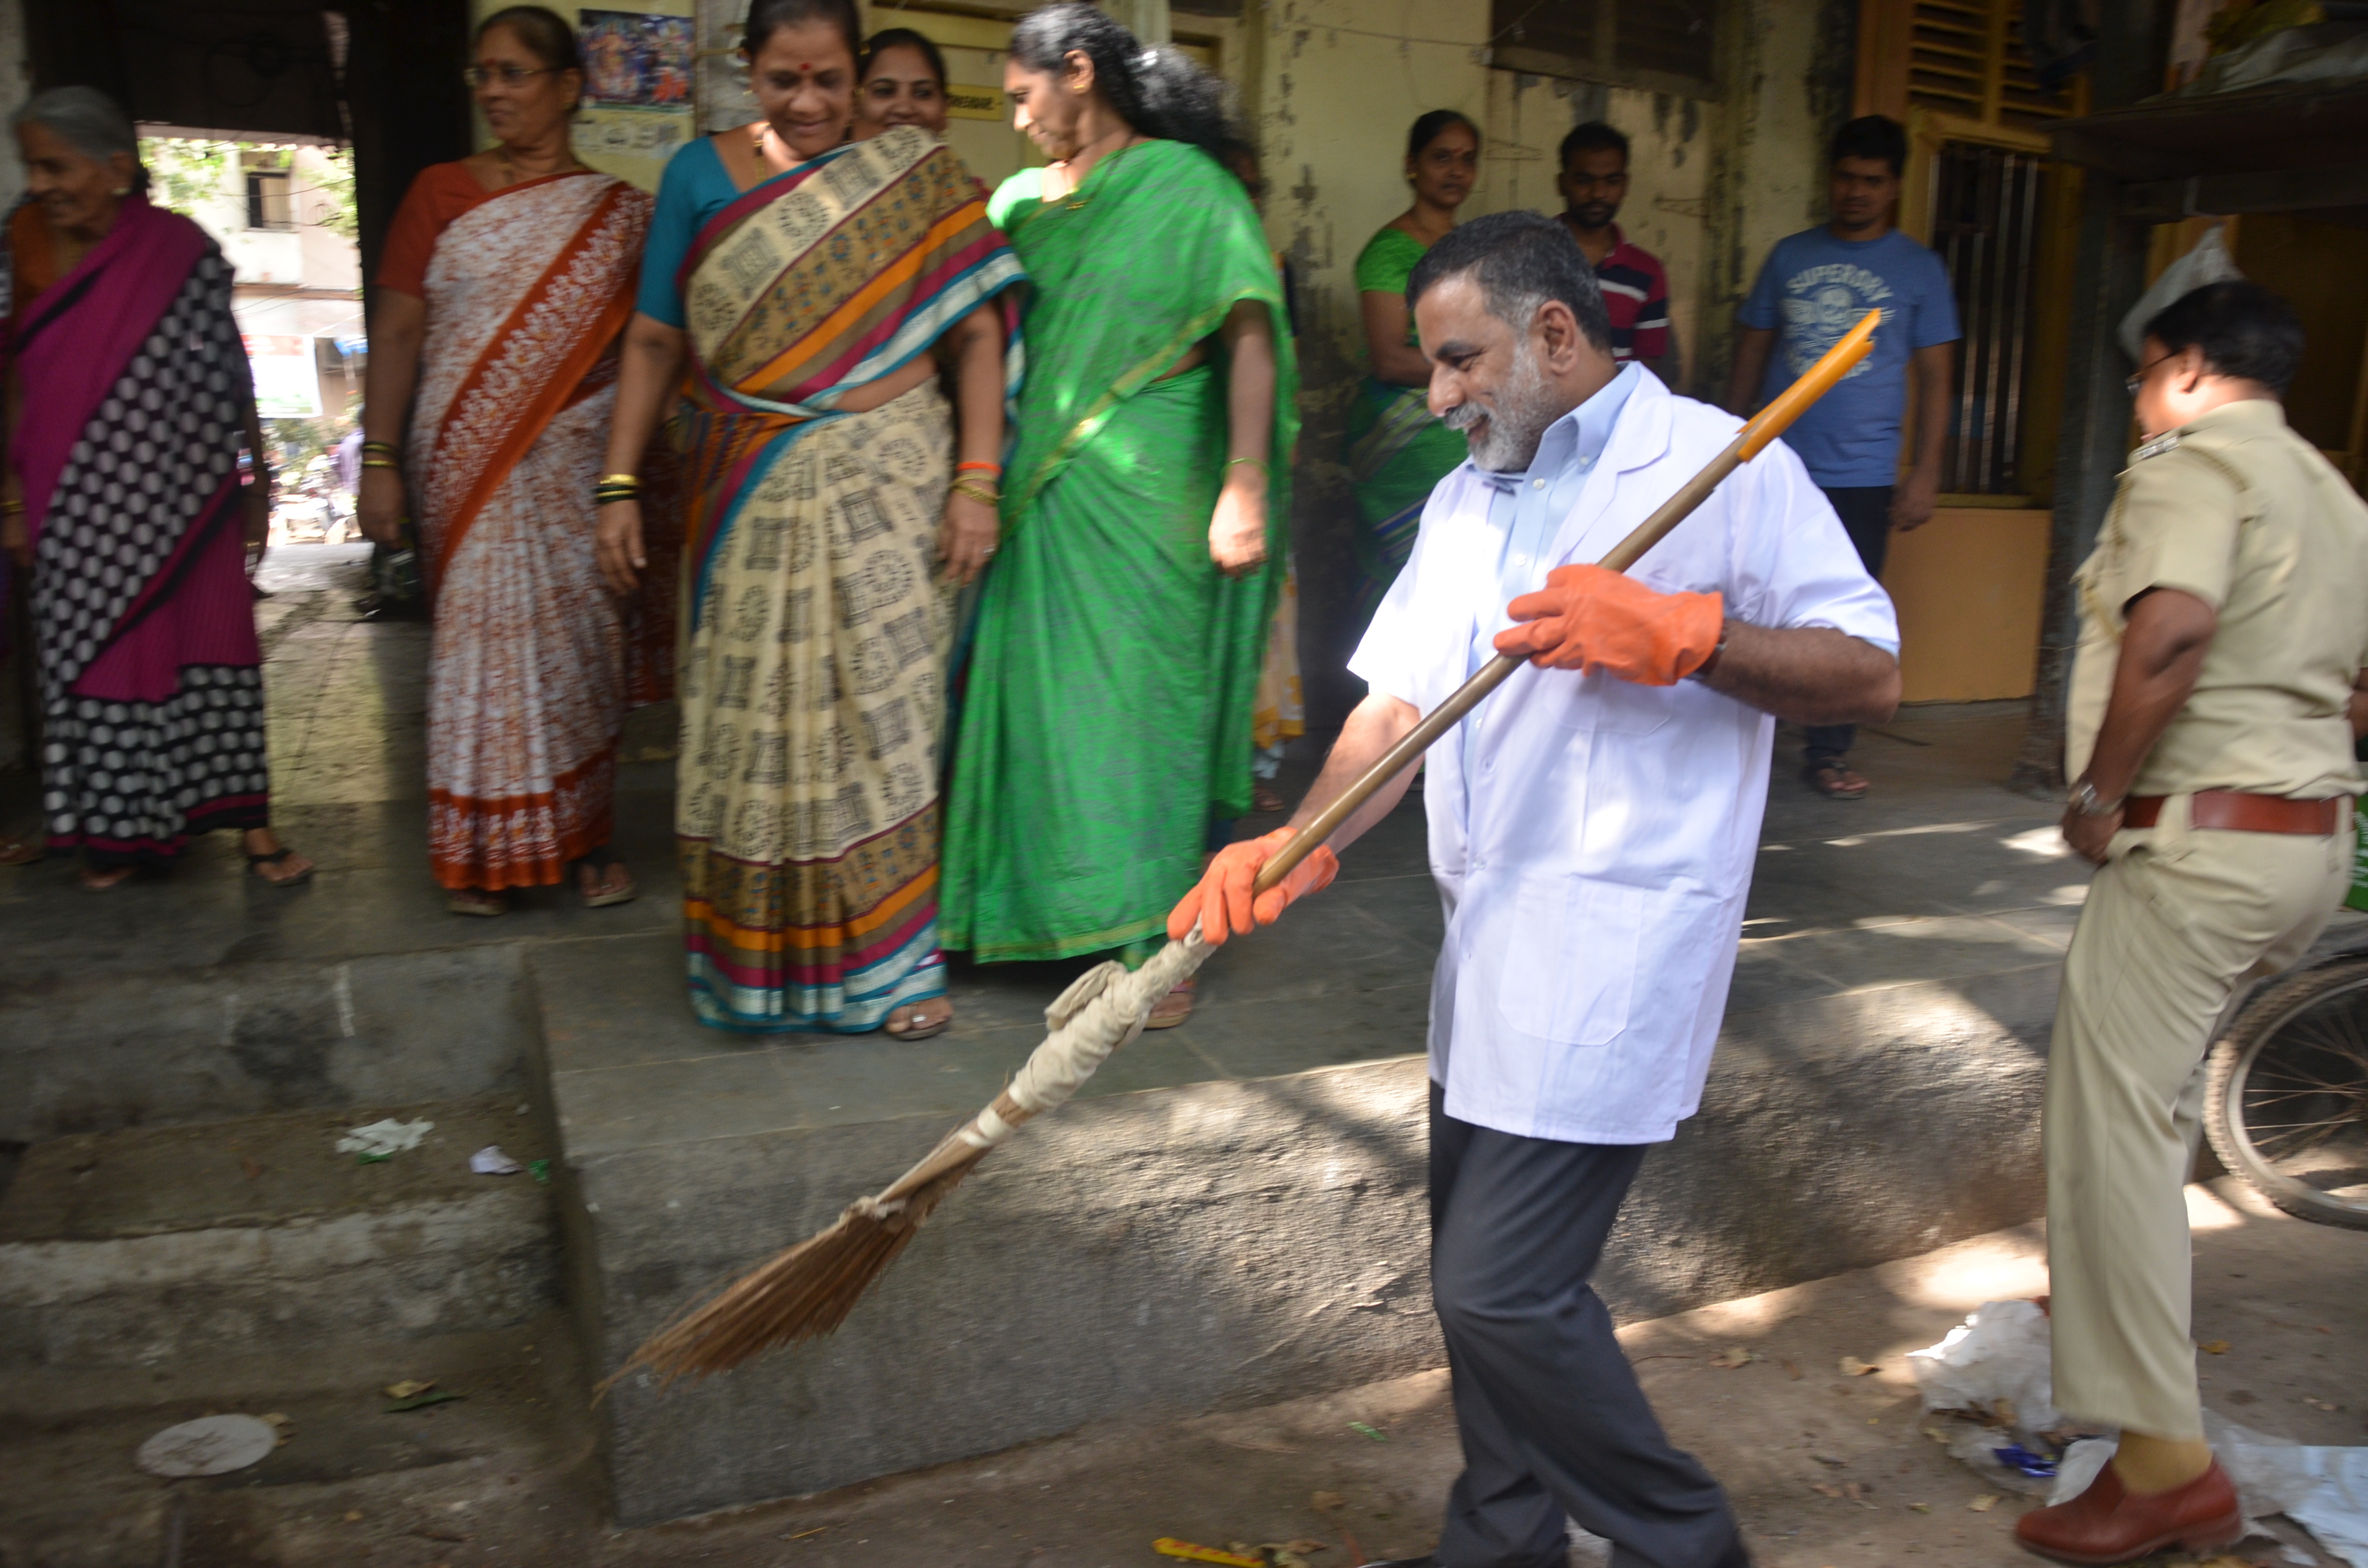 Honorable Shri A. Madhukumar Reddy, Joint Secretary, Ministry Of Textile cleaning the road and let people inspiring for the cleaness on the occasion of Swachh Bharat Pakhwada 2017